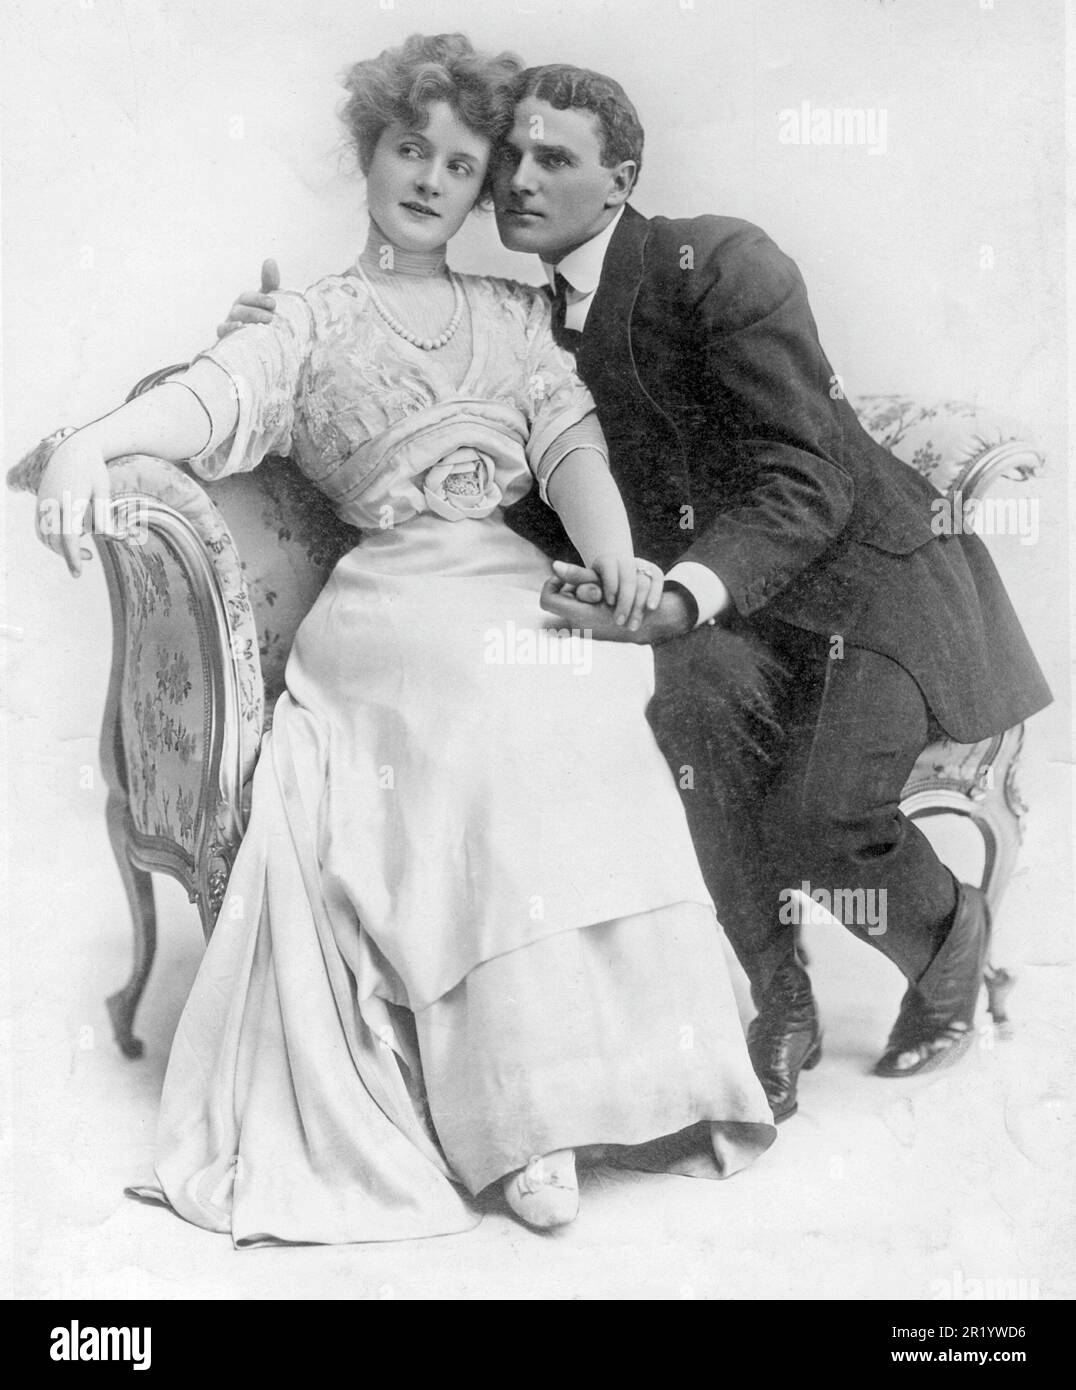 Lovers. American stage actors Billie Burke and Cyril Keightley in a tender moment in connection with they appearing in the Broadway musical "Love watches" 1908. Stock Photo